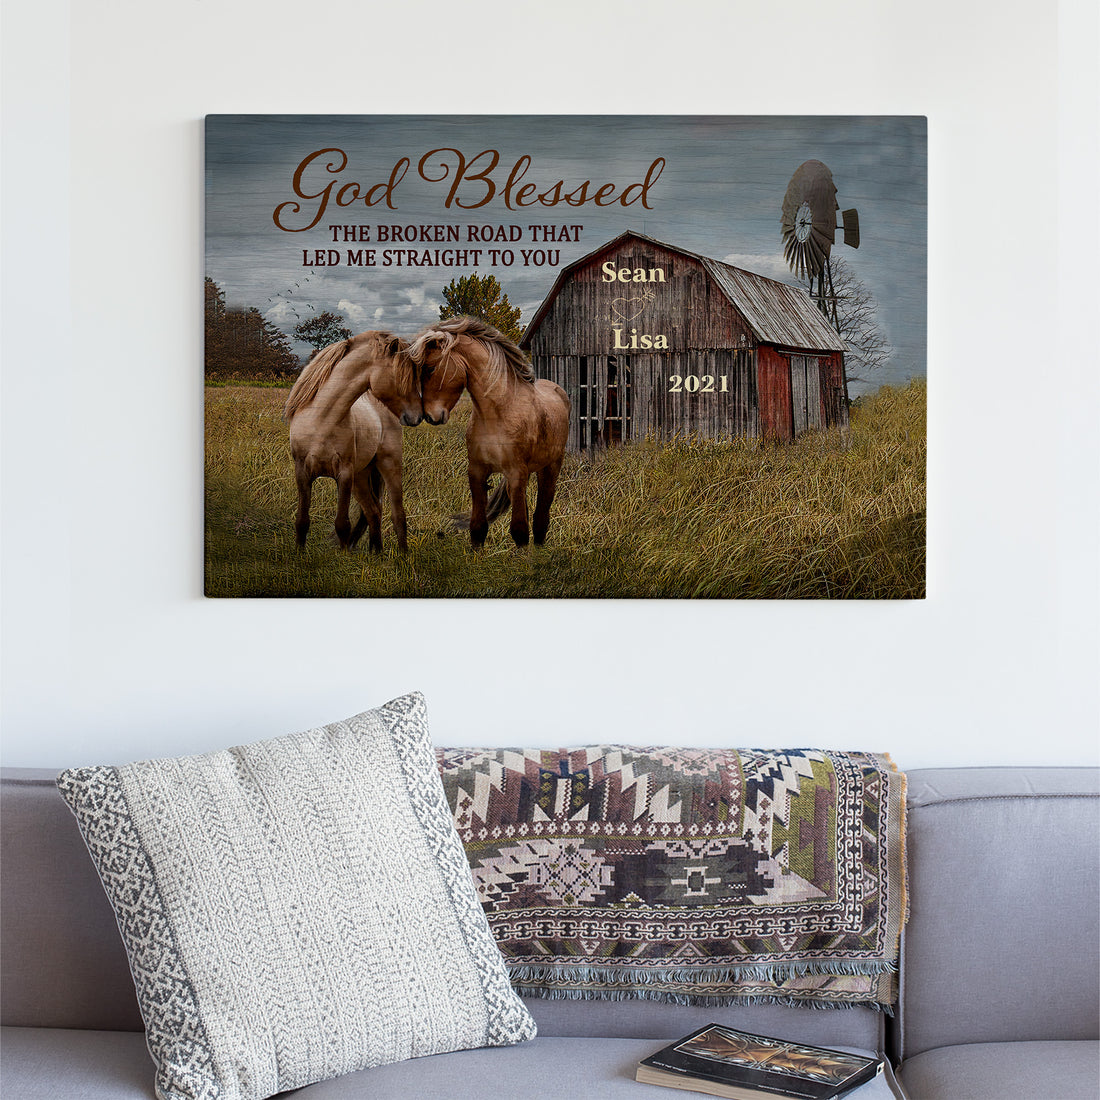 Canvas Wall Art, God Blessed The Broken Road Poster, Wedding Gifts, 1st Anniversary, Couple Gifts, Horse Lover Gifts, Farmhouse Christmas Decor, Wall Art For Living Room